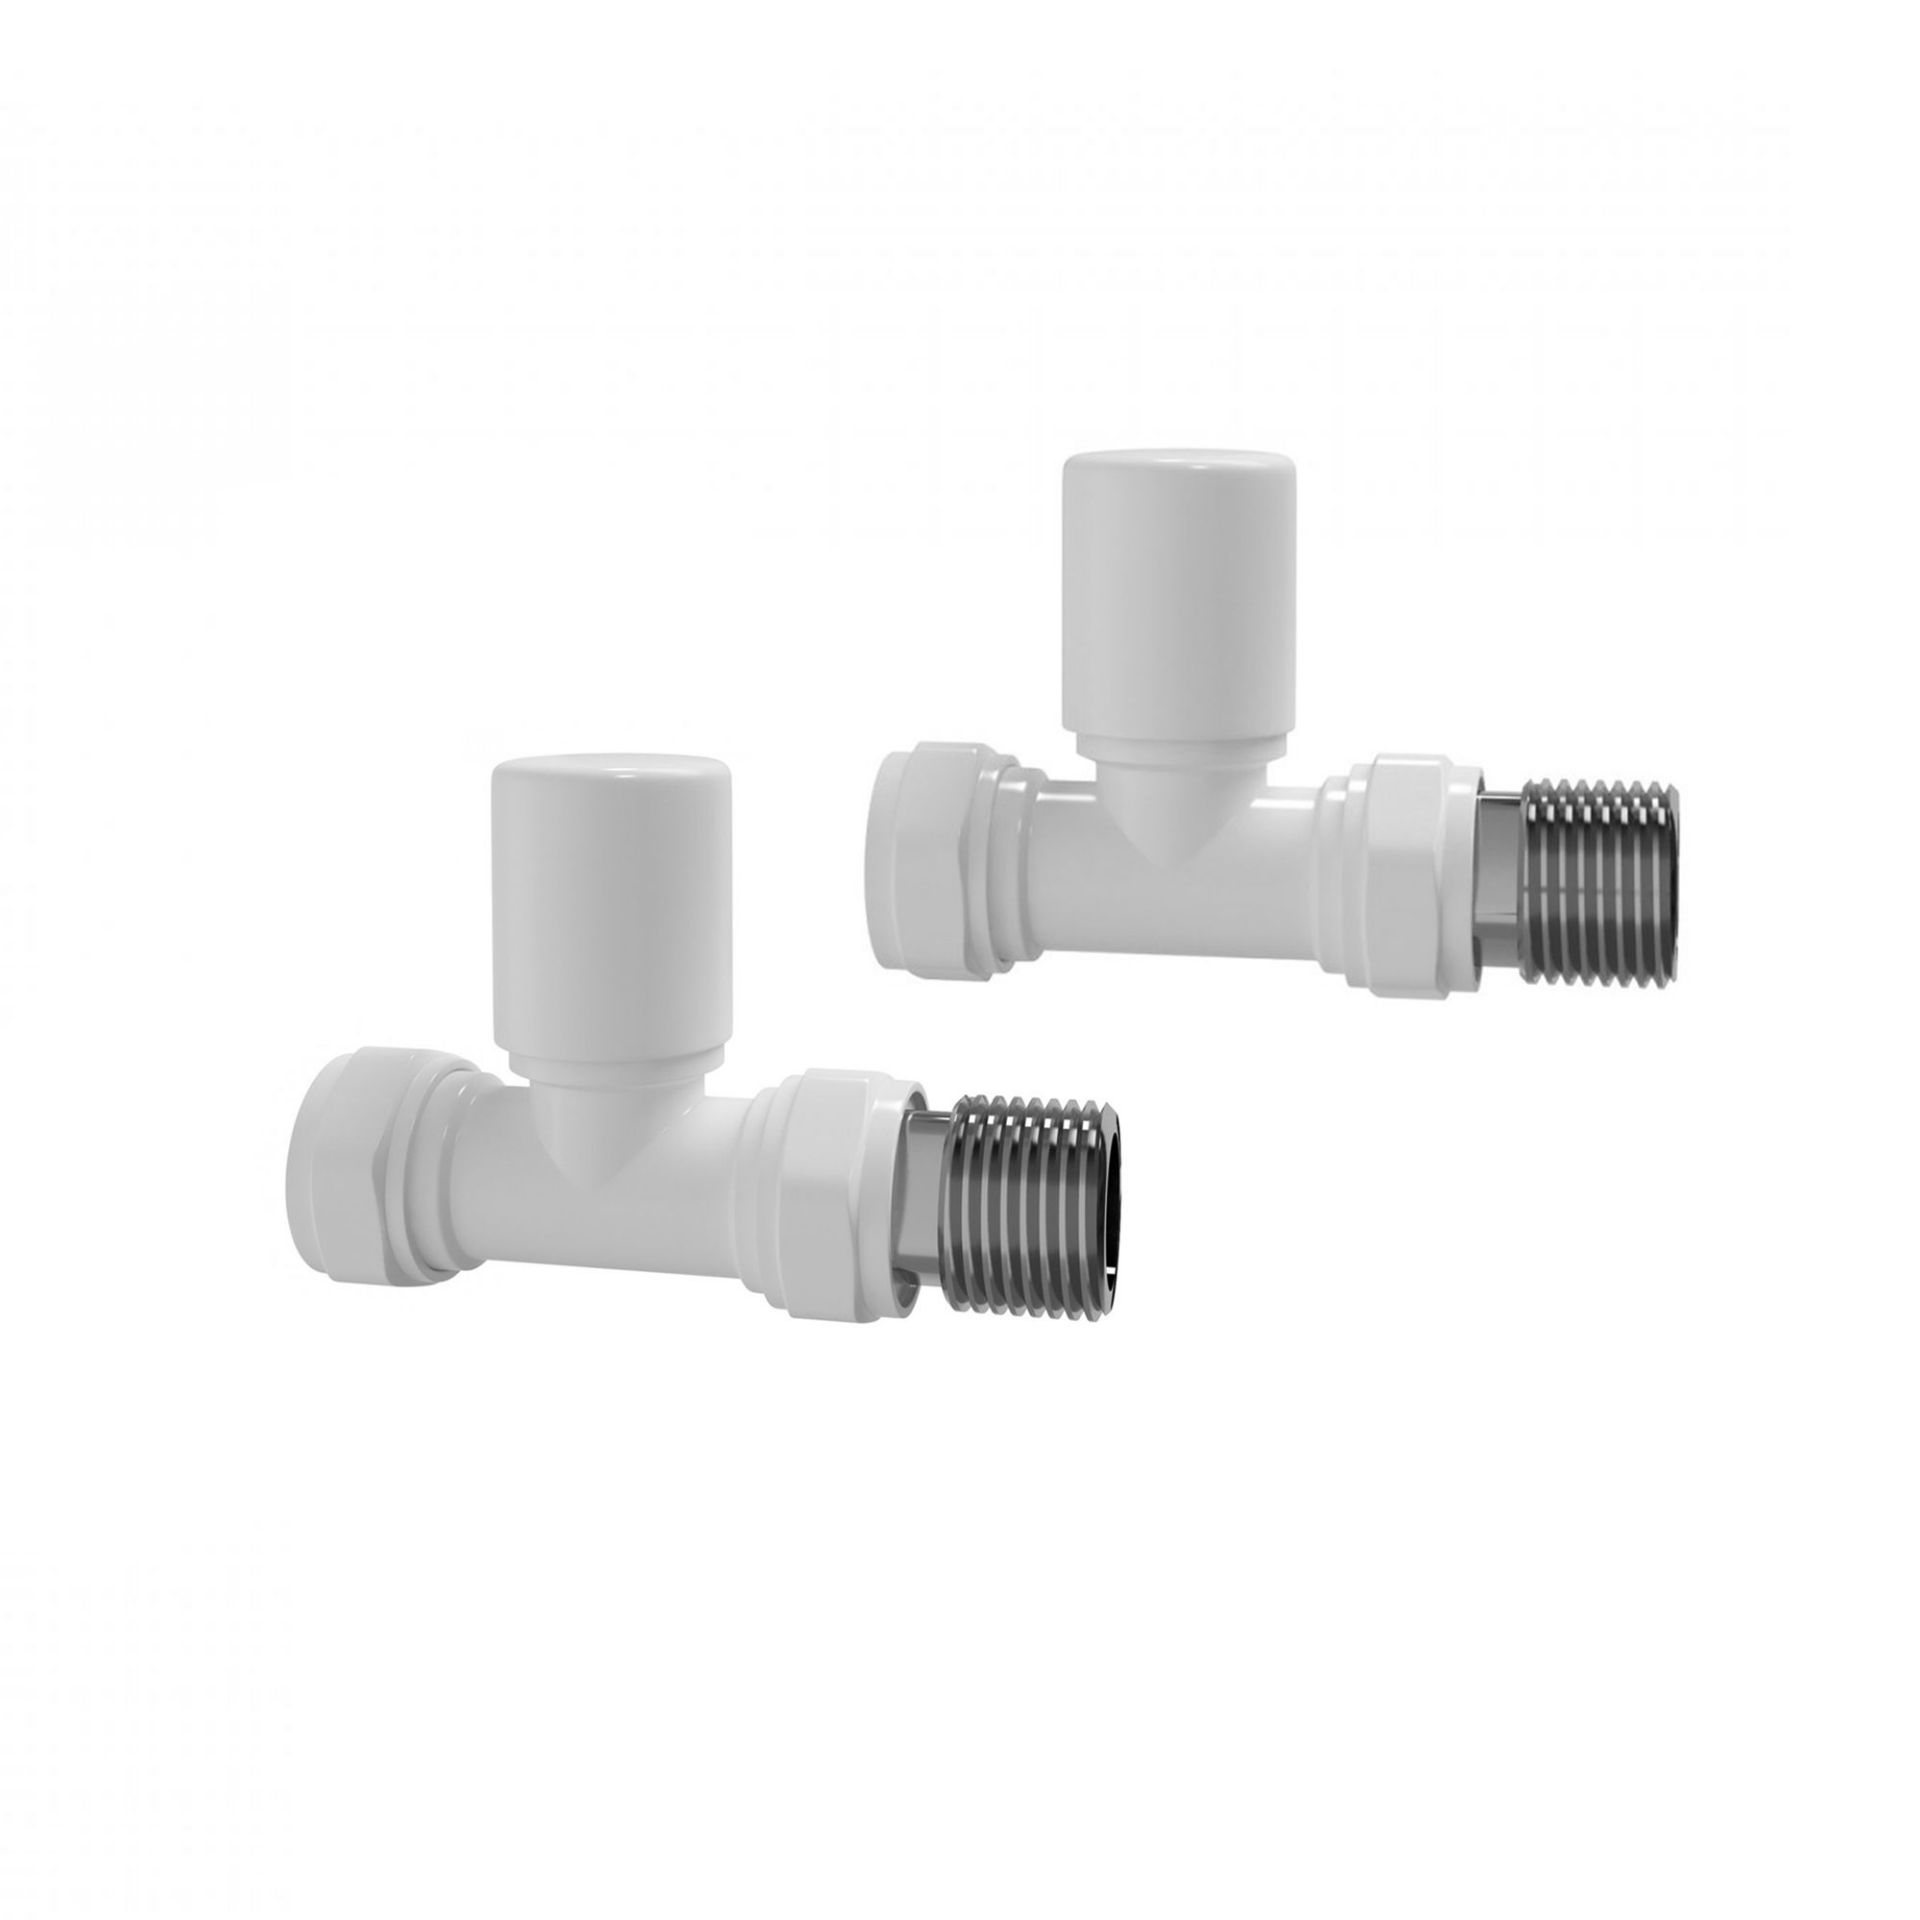 (VZ17) 15mm Standard Connection Straight Gloss White Radiator Valves Solid brass construct - Image 2 of 3